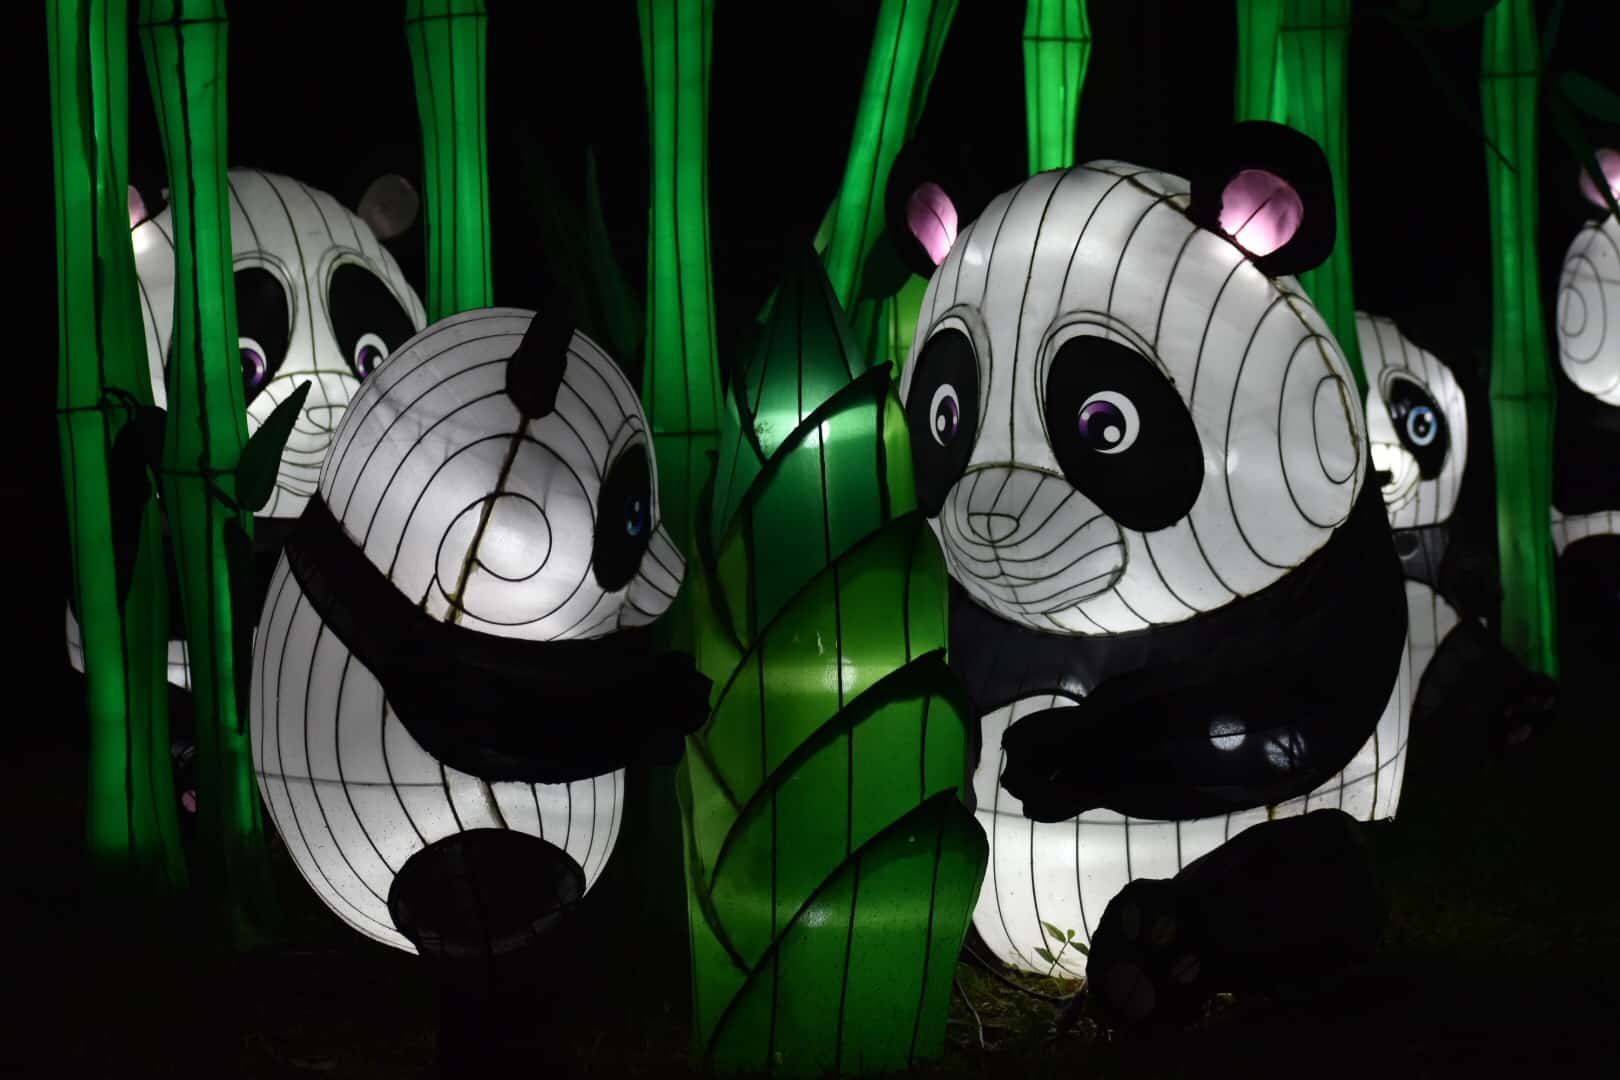 photo of a scene of pandas and green plants, all made of lanterns